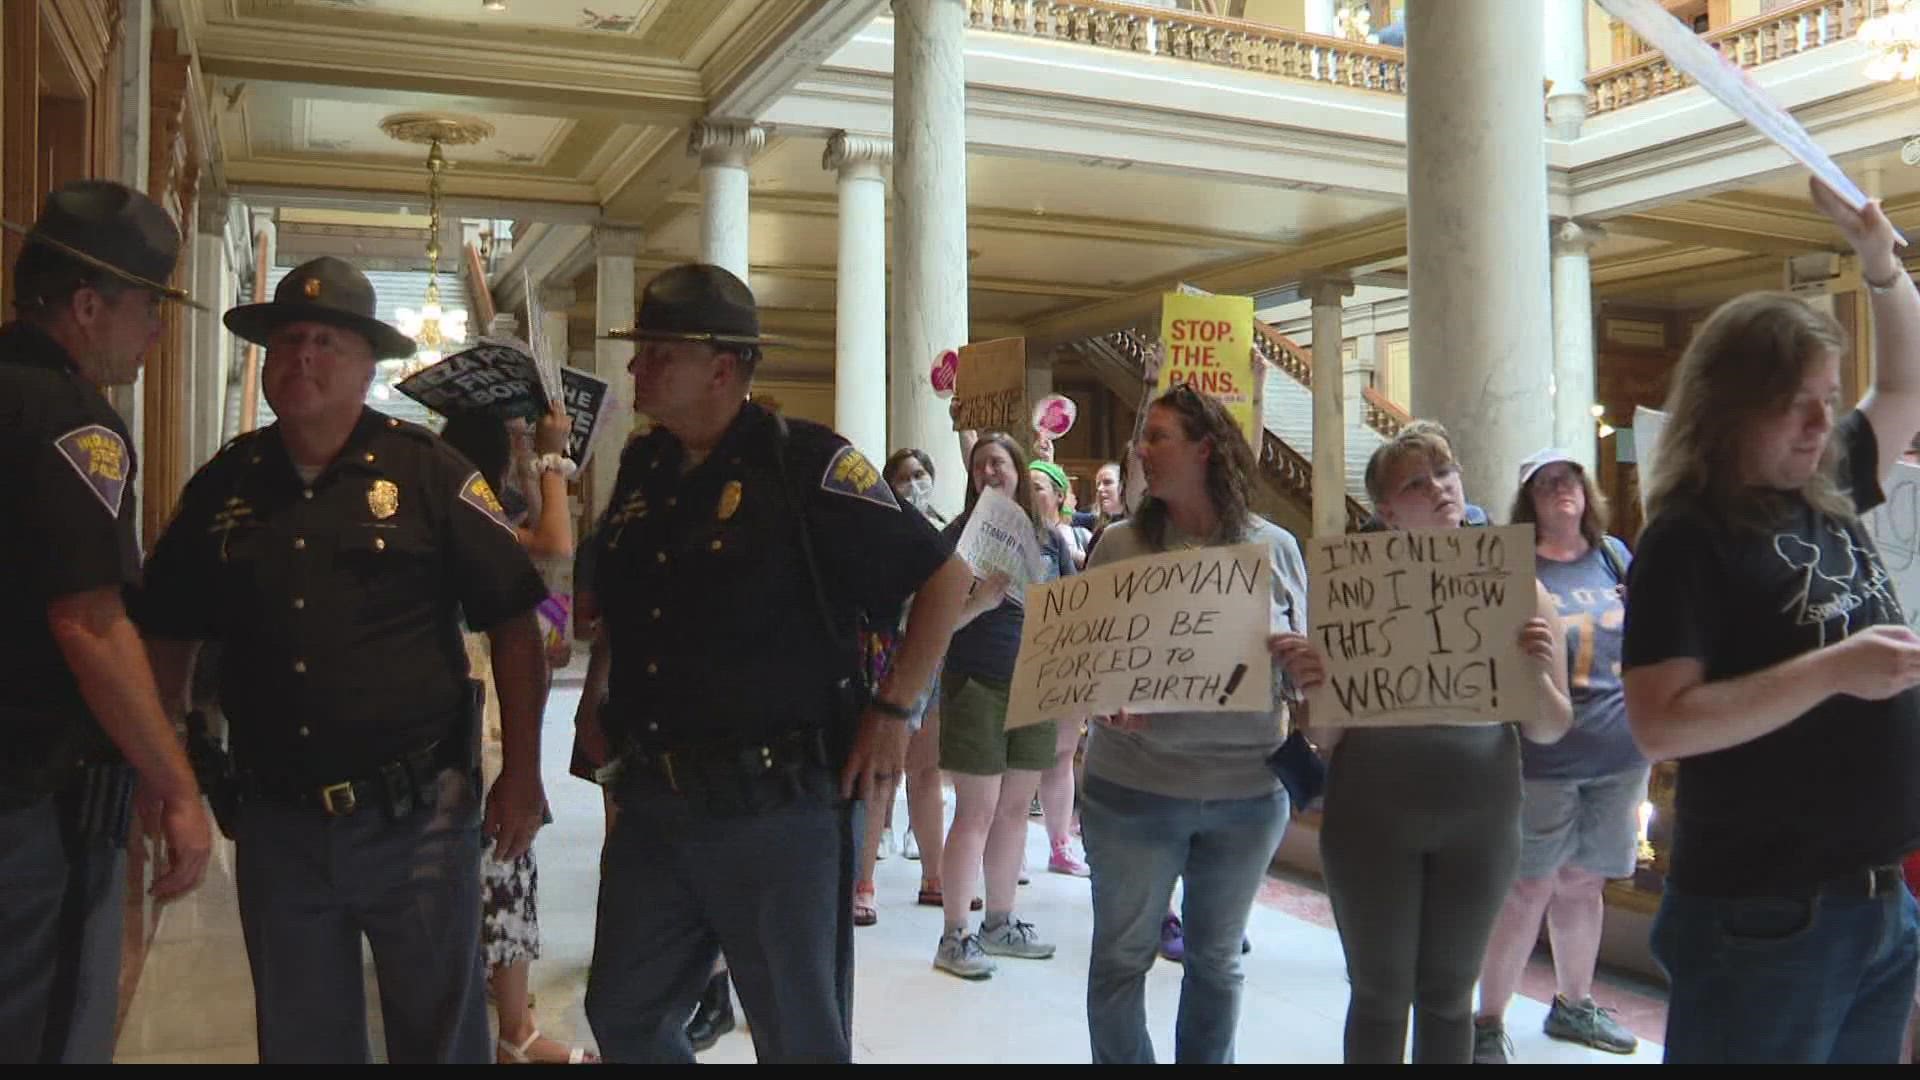 Protesters on both sides of the abortion access debate made their voices heard Monday as the special session got underway at the Indiana Statehouse.